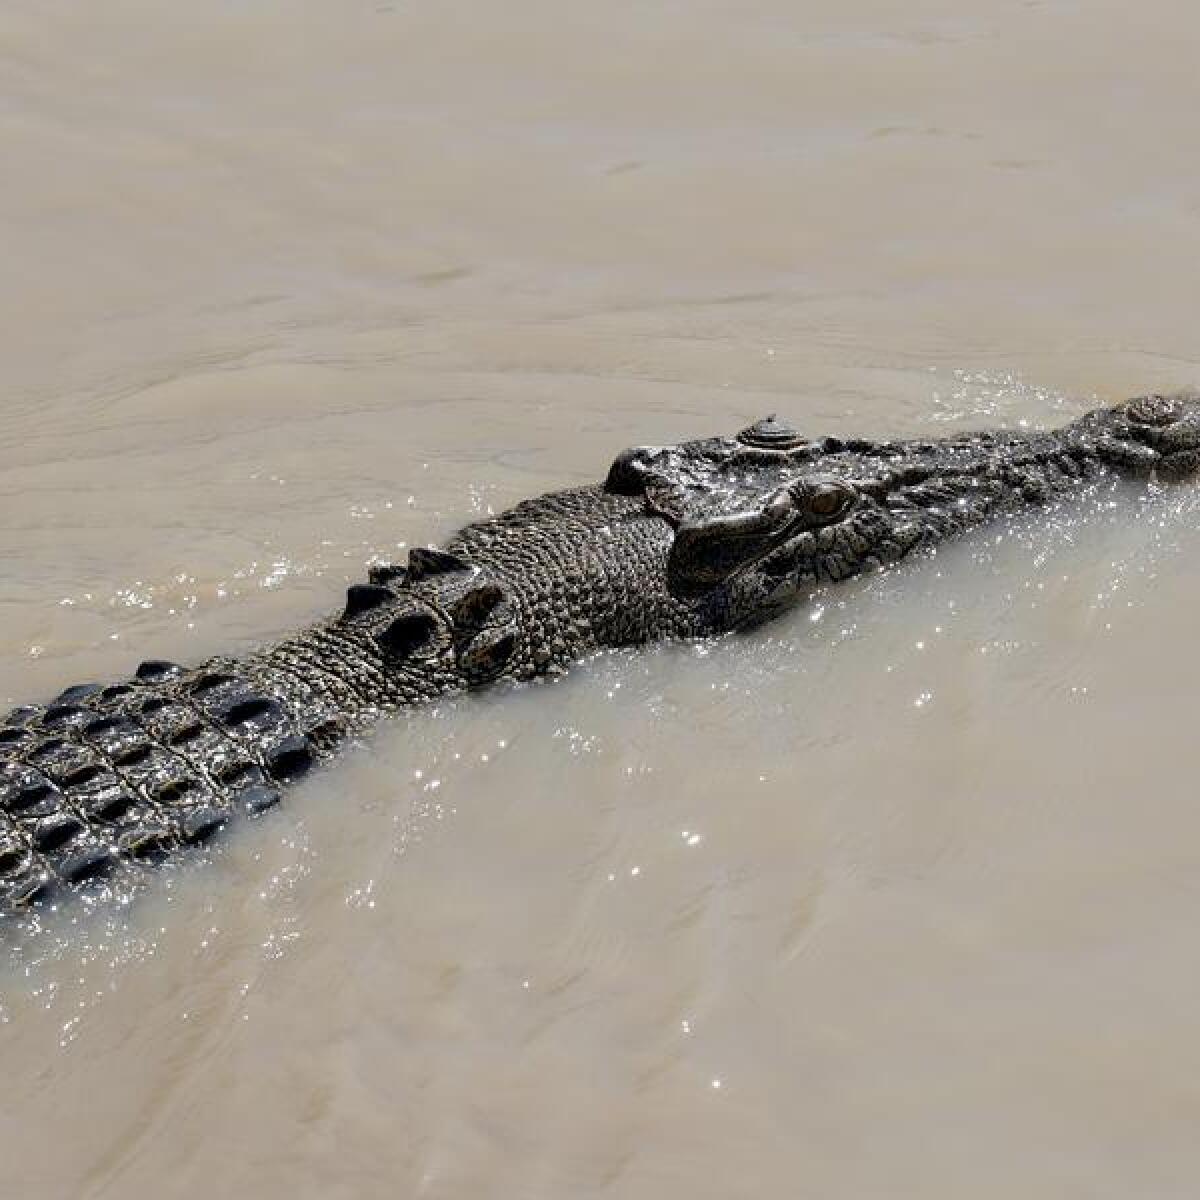 A croc has been caught in north Queensland after lunging at a man.